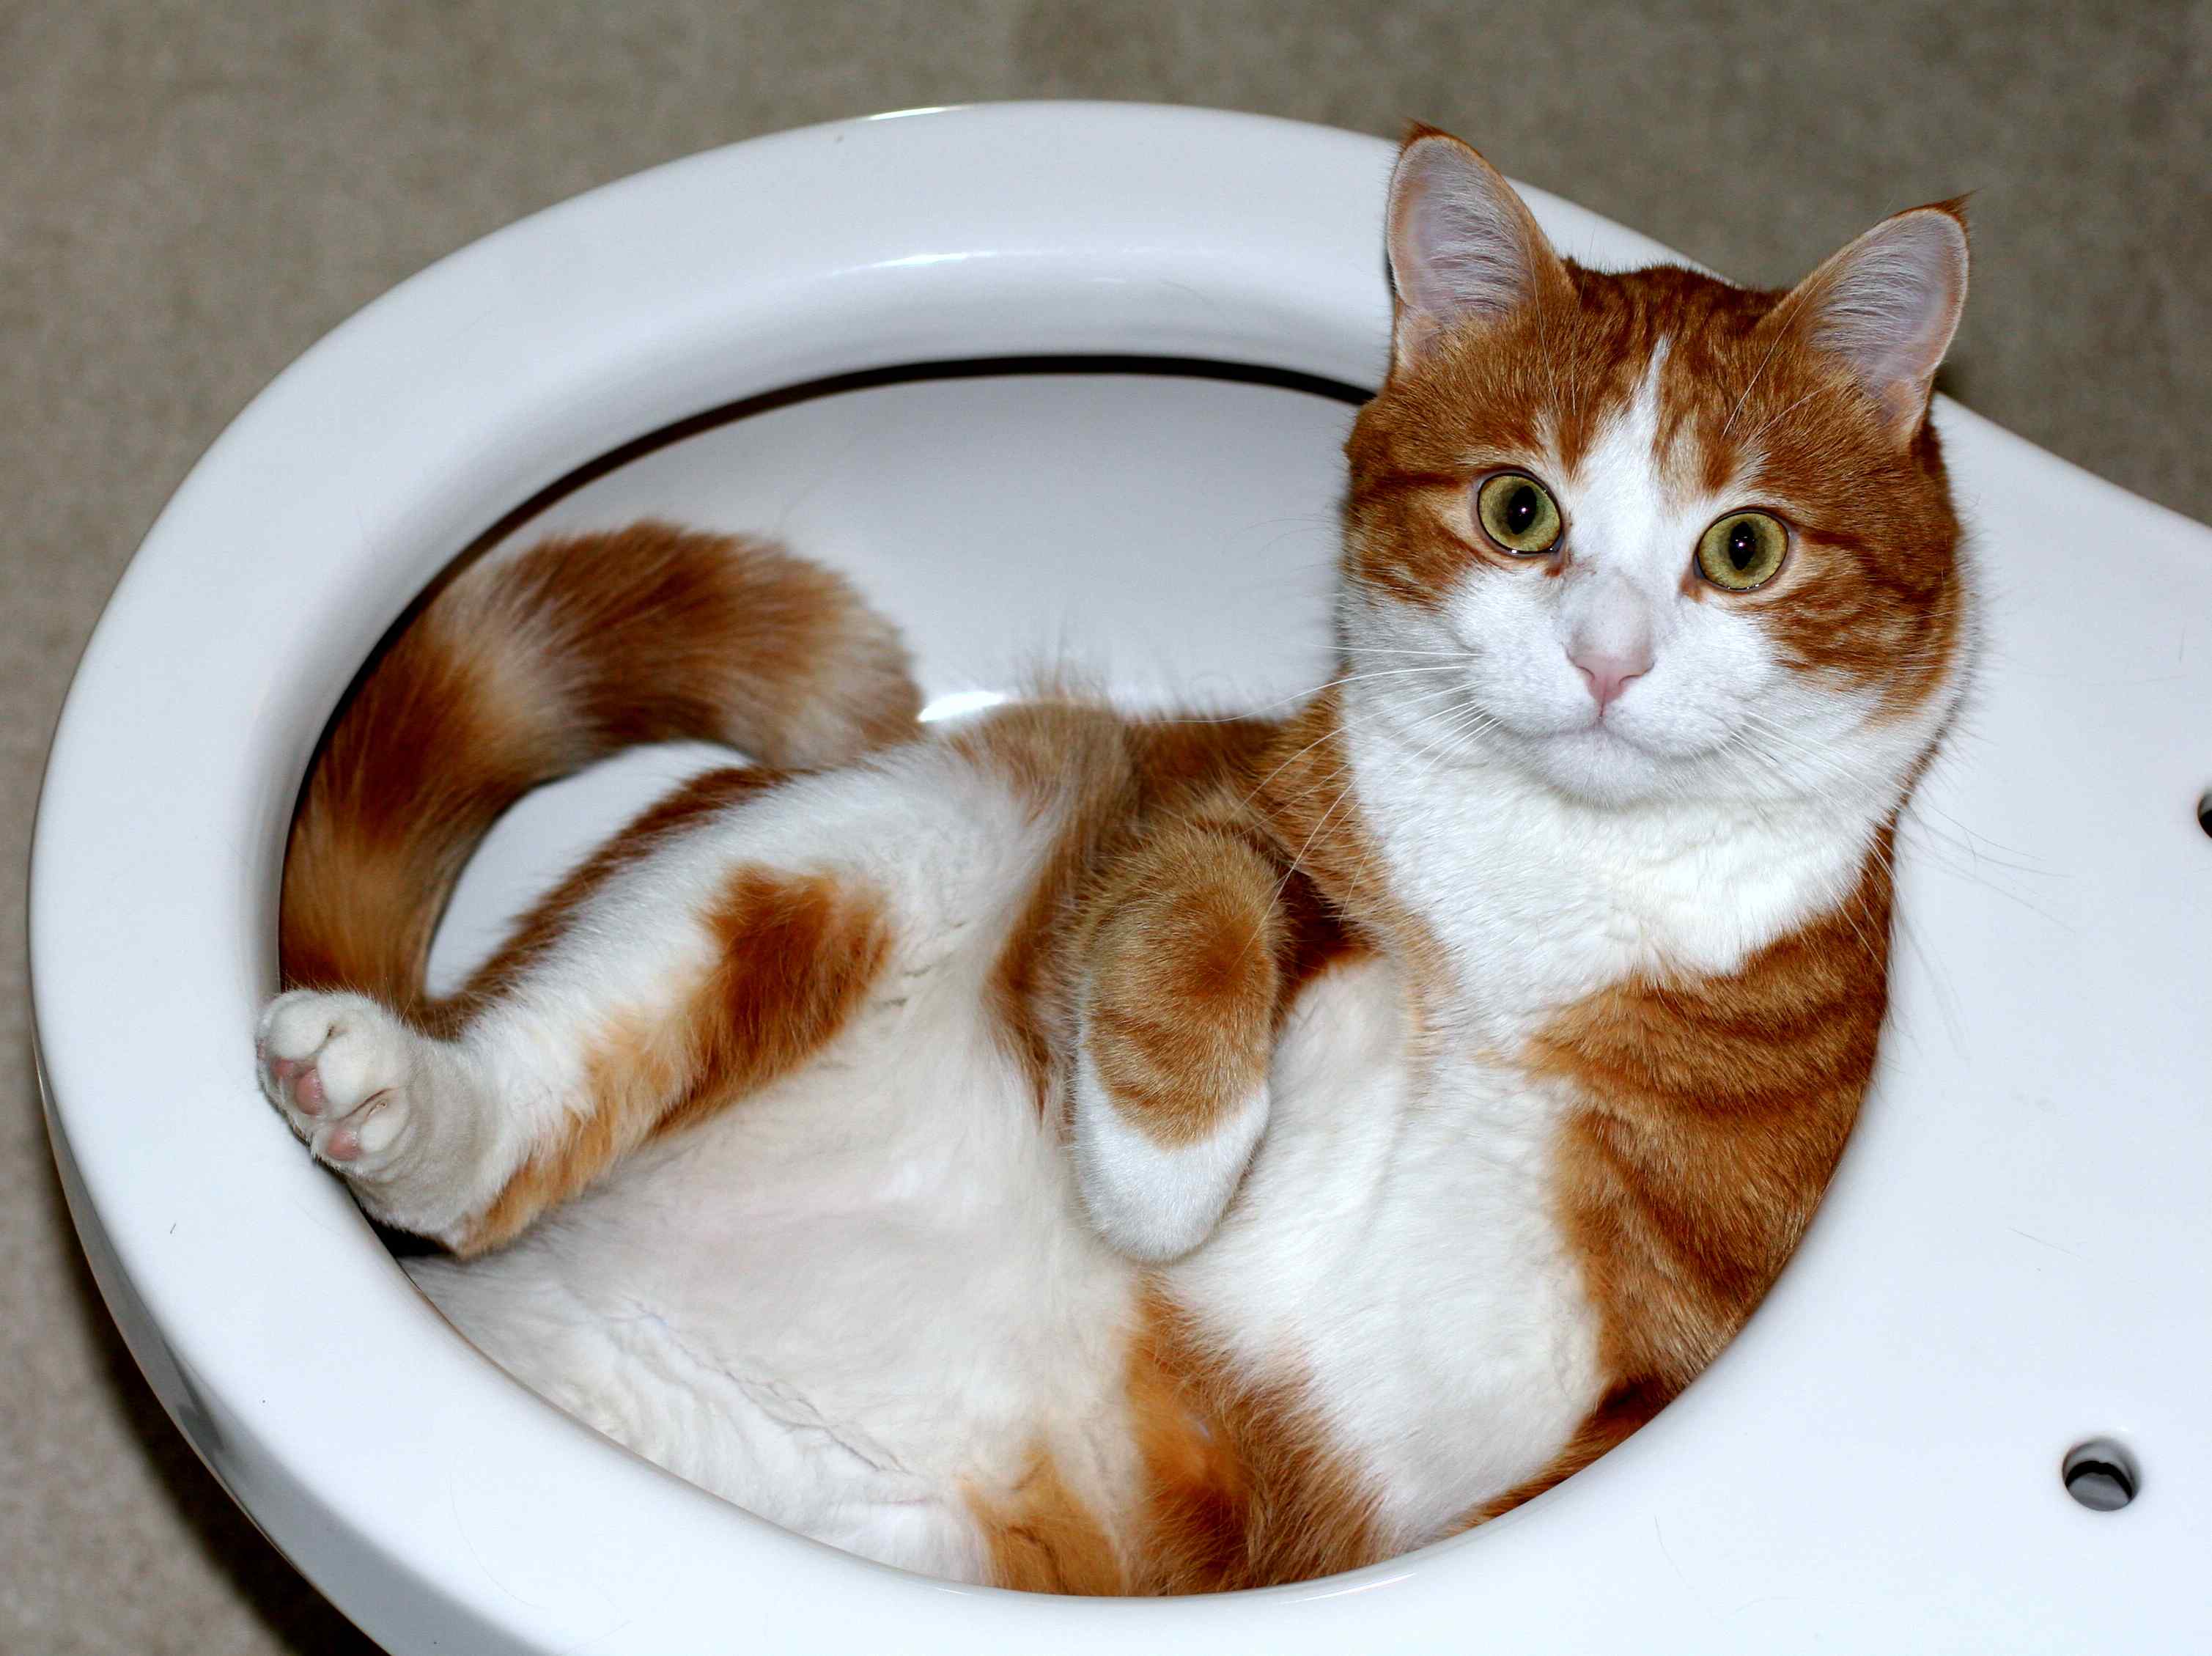 Cat_lying_in_a_toilet_bowl-compressed